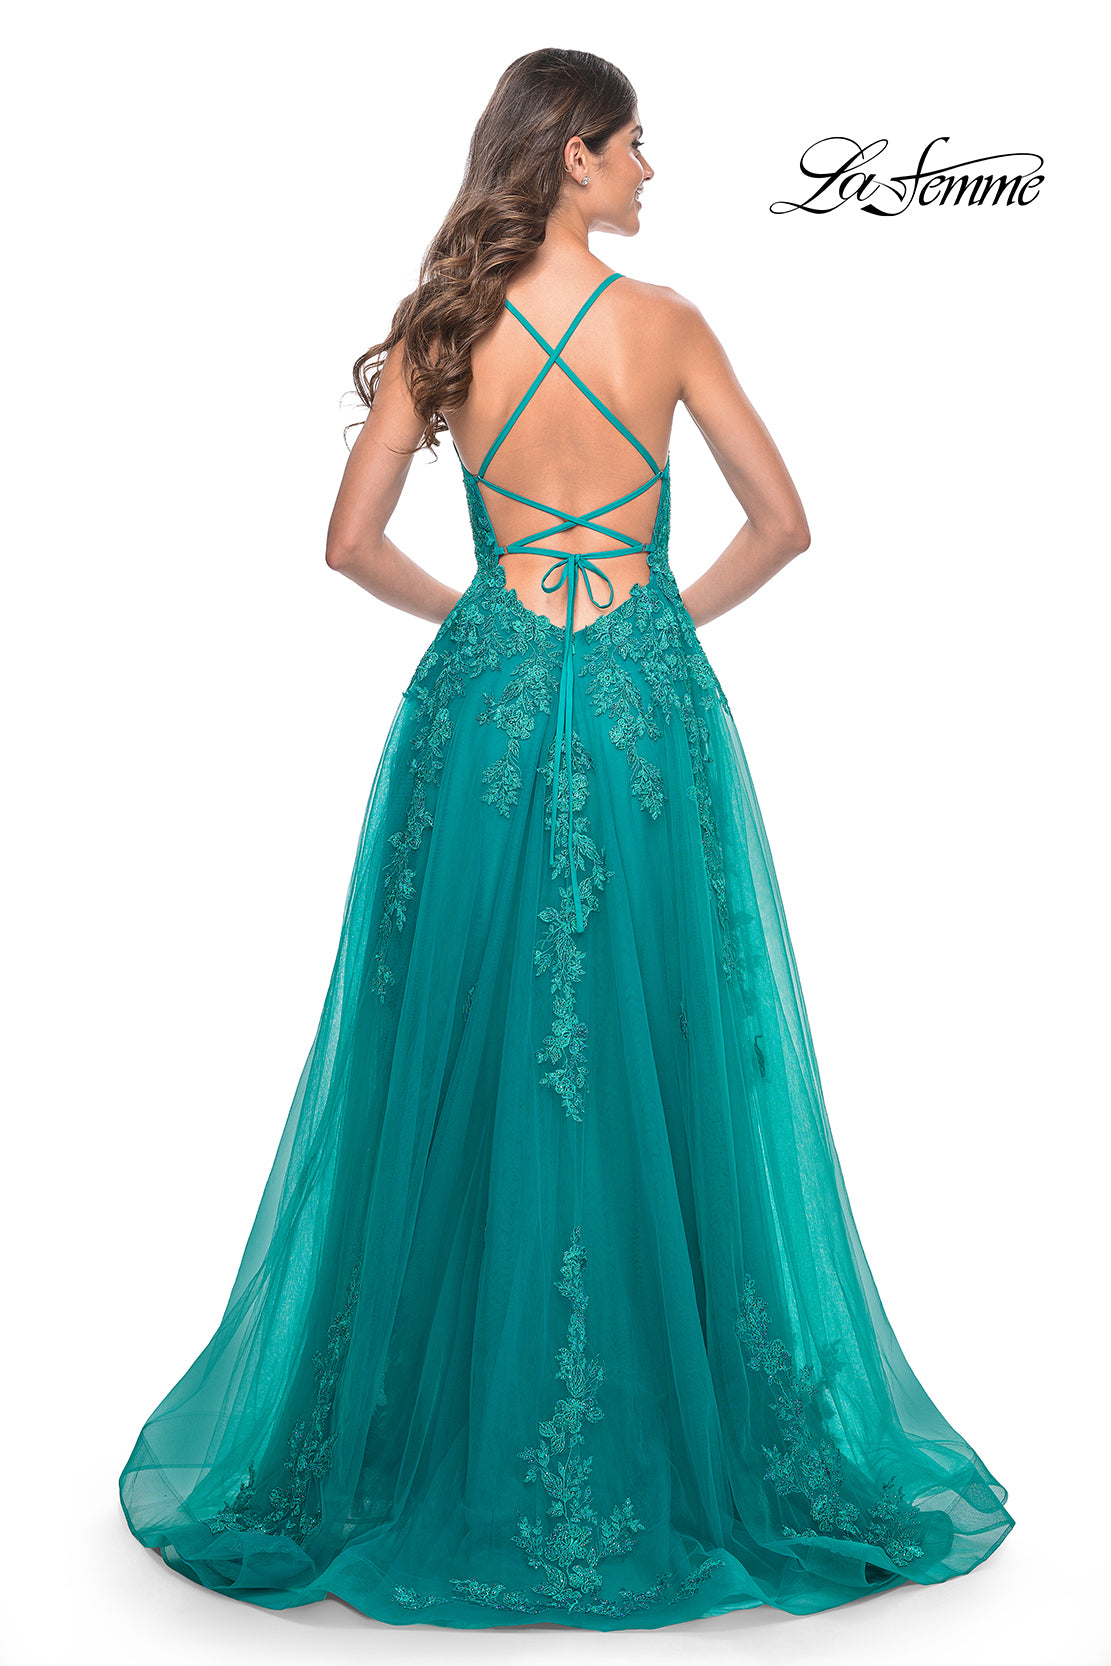 La-Femme-32062-Plunging-Neckline-Criss-Cross-Back-Corset-Lace-Tulle-A-Line-Teal-Evening-Dress-B-Chic-Fashions-Prom-Dress